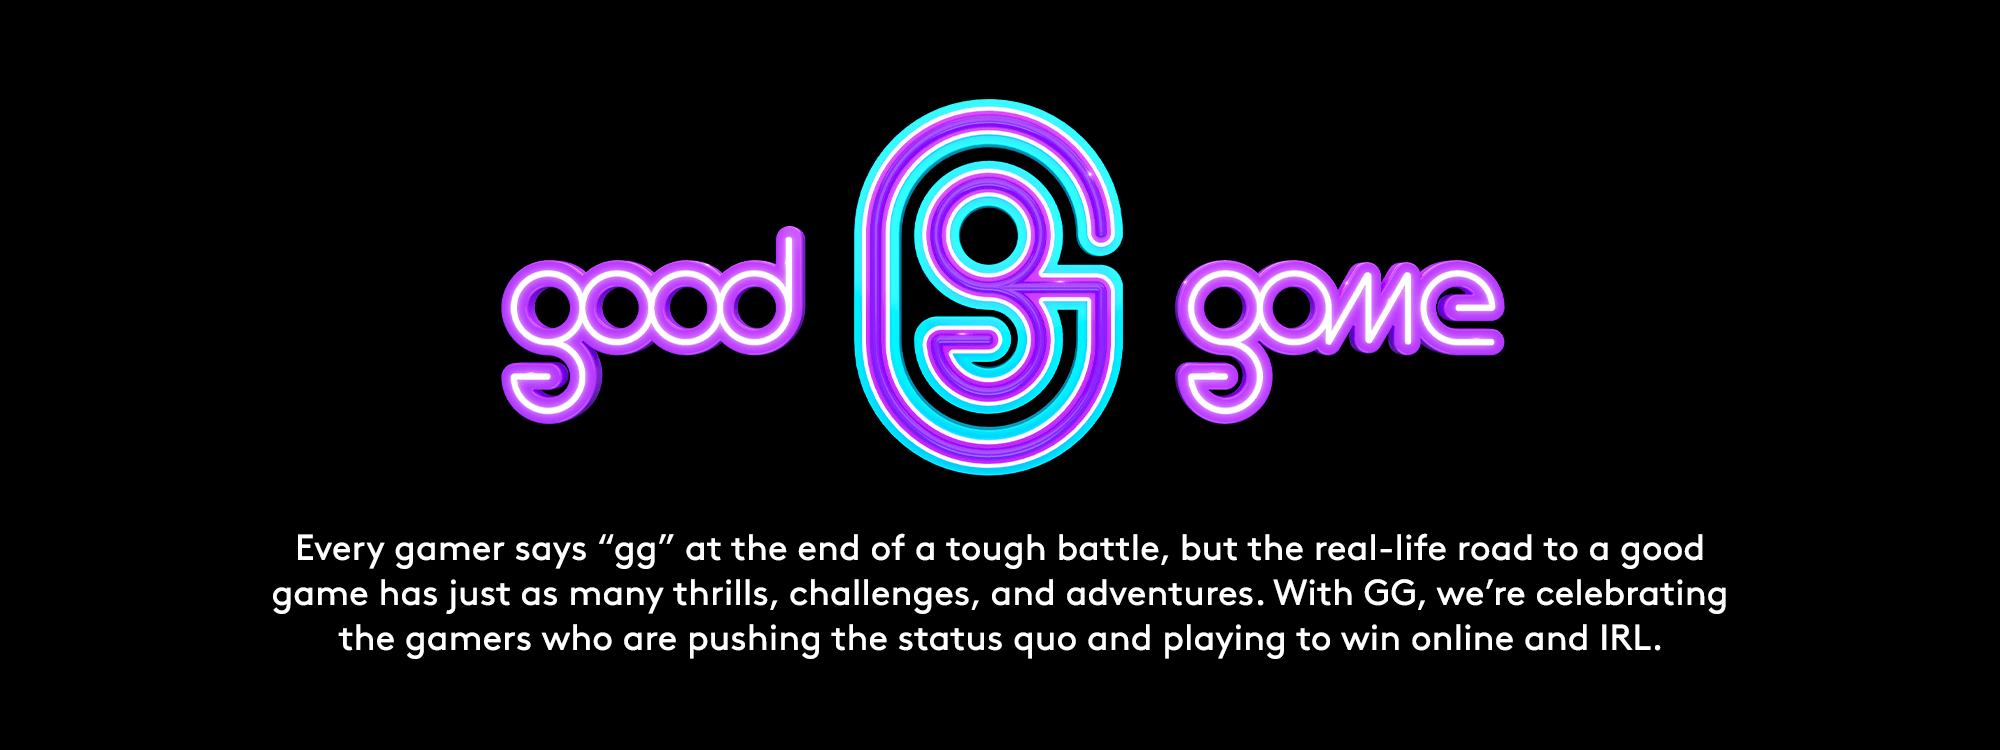 GG. Good Game. Every gamer says GG at the end of a tough battle, but the real-life road to a good game has many thrills, challenges, and adventures. GG celebrates the gamers who are pushing the status quo and playing to win online and IRL.